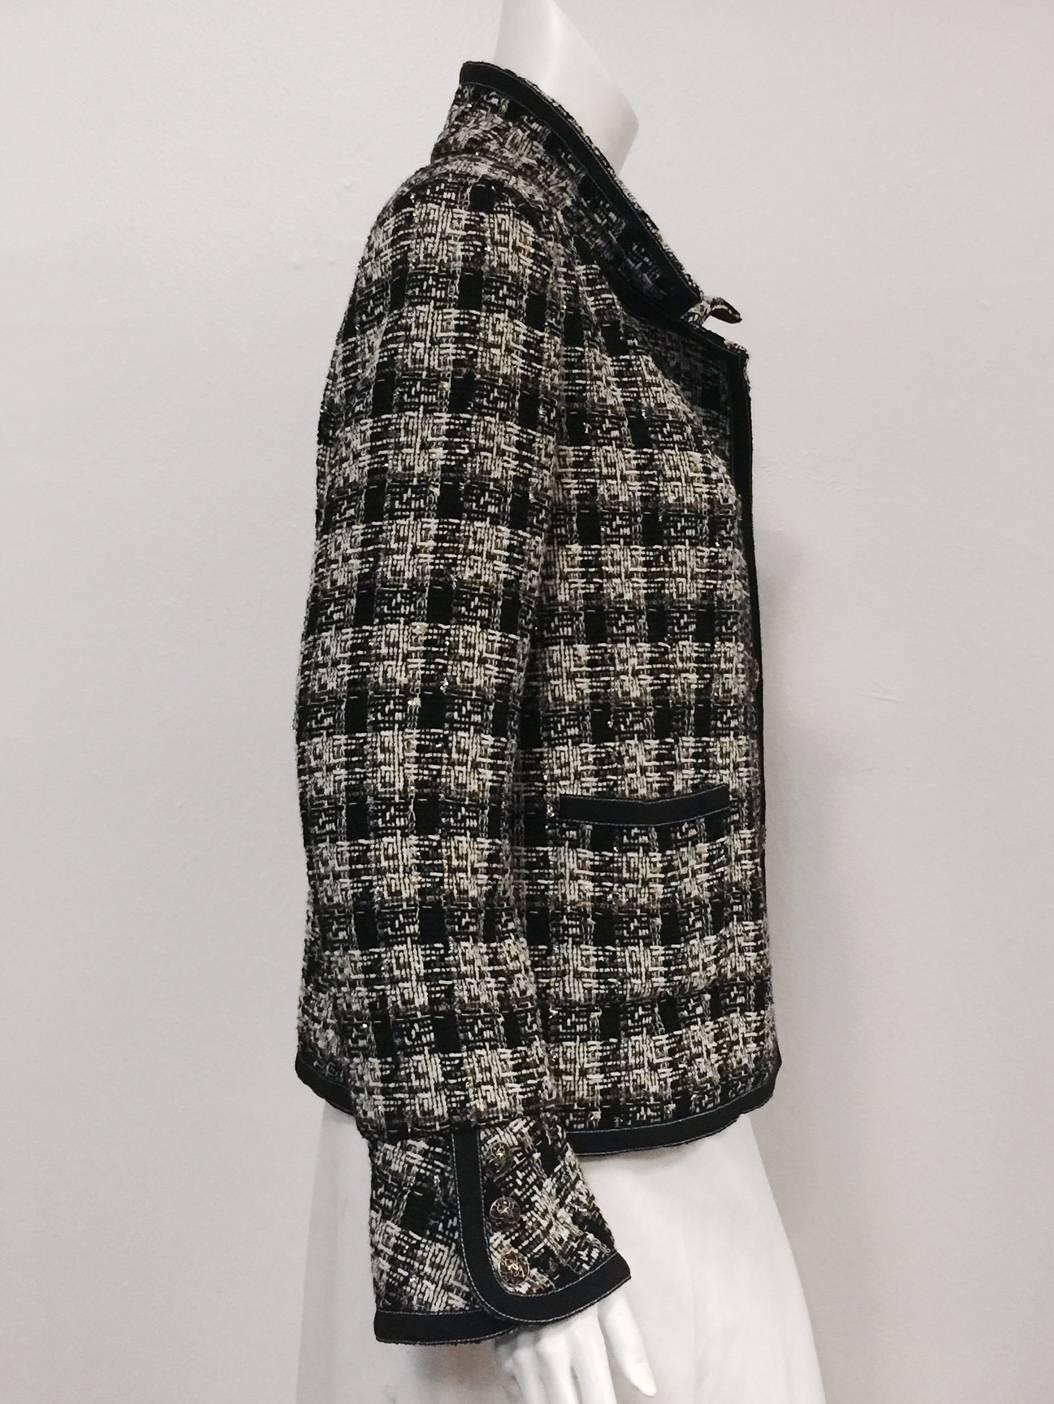 Chanel 2008 Fall Wool Tweed Jacket is worthy of Coco herself!  Features signature wool blend tweed in shades of black, mocha, and ivory with just the right amount of silver metallic thread.  Two pockets and five enamel double 